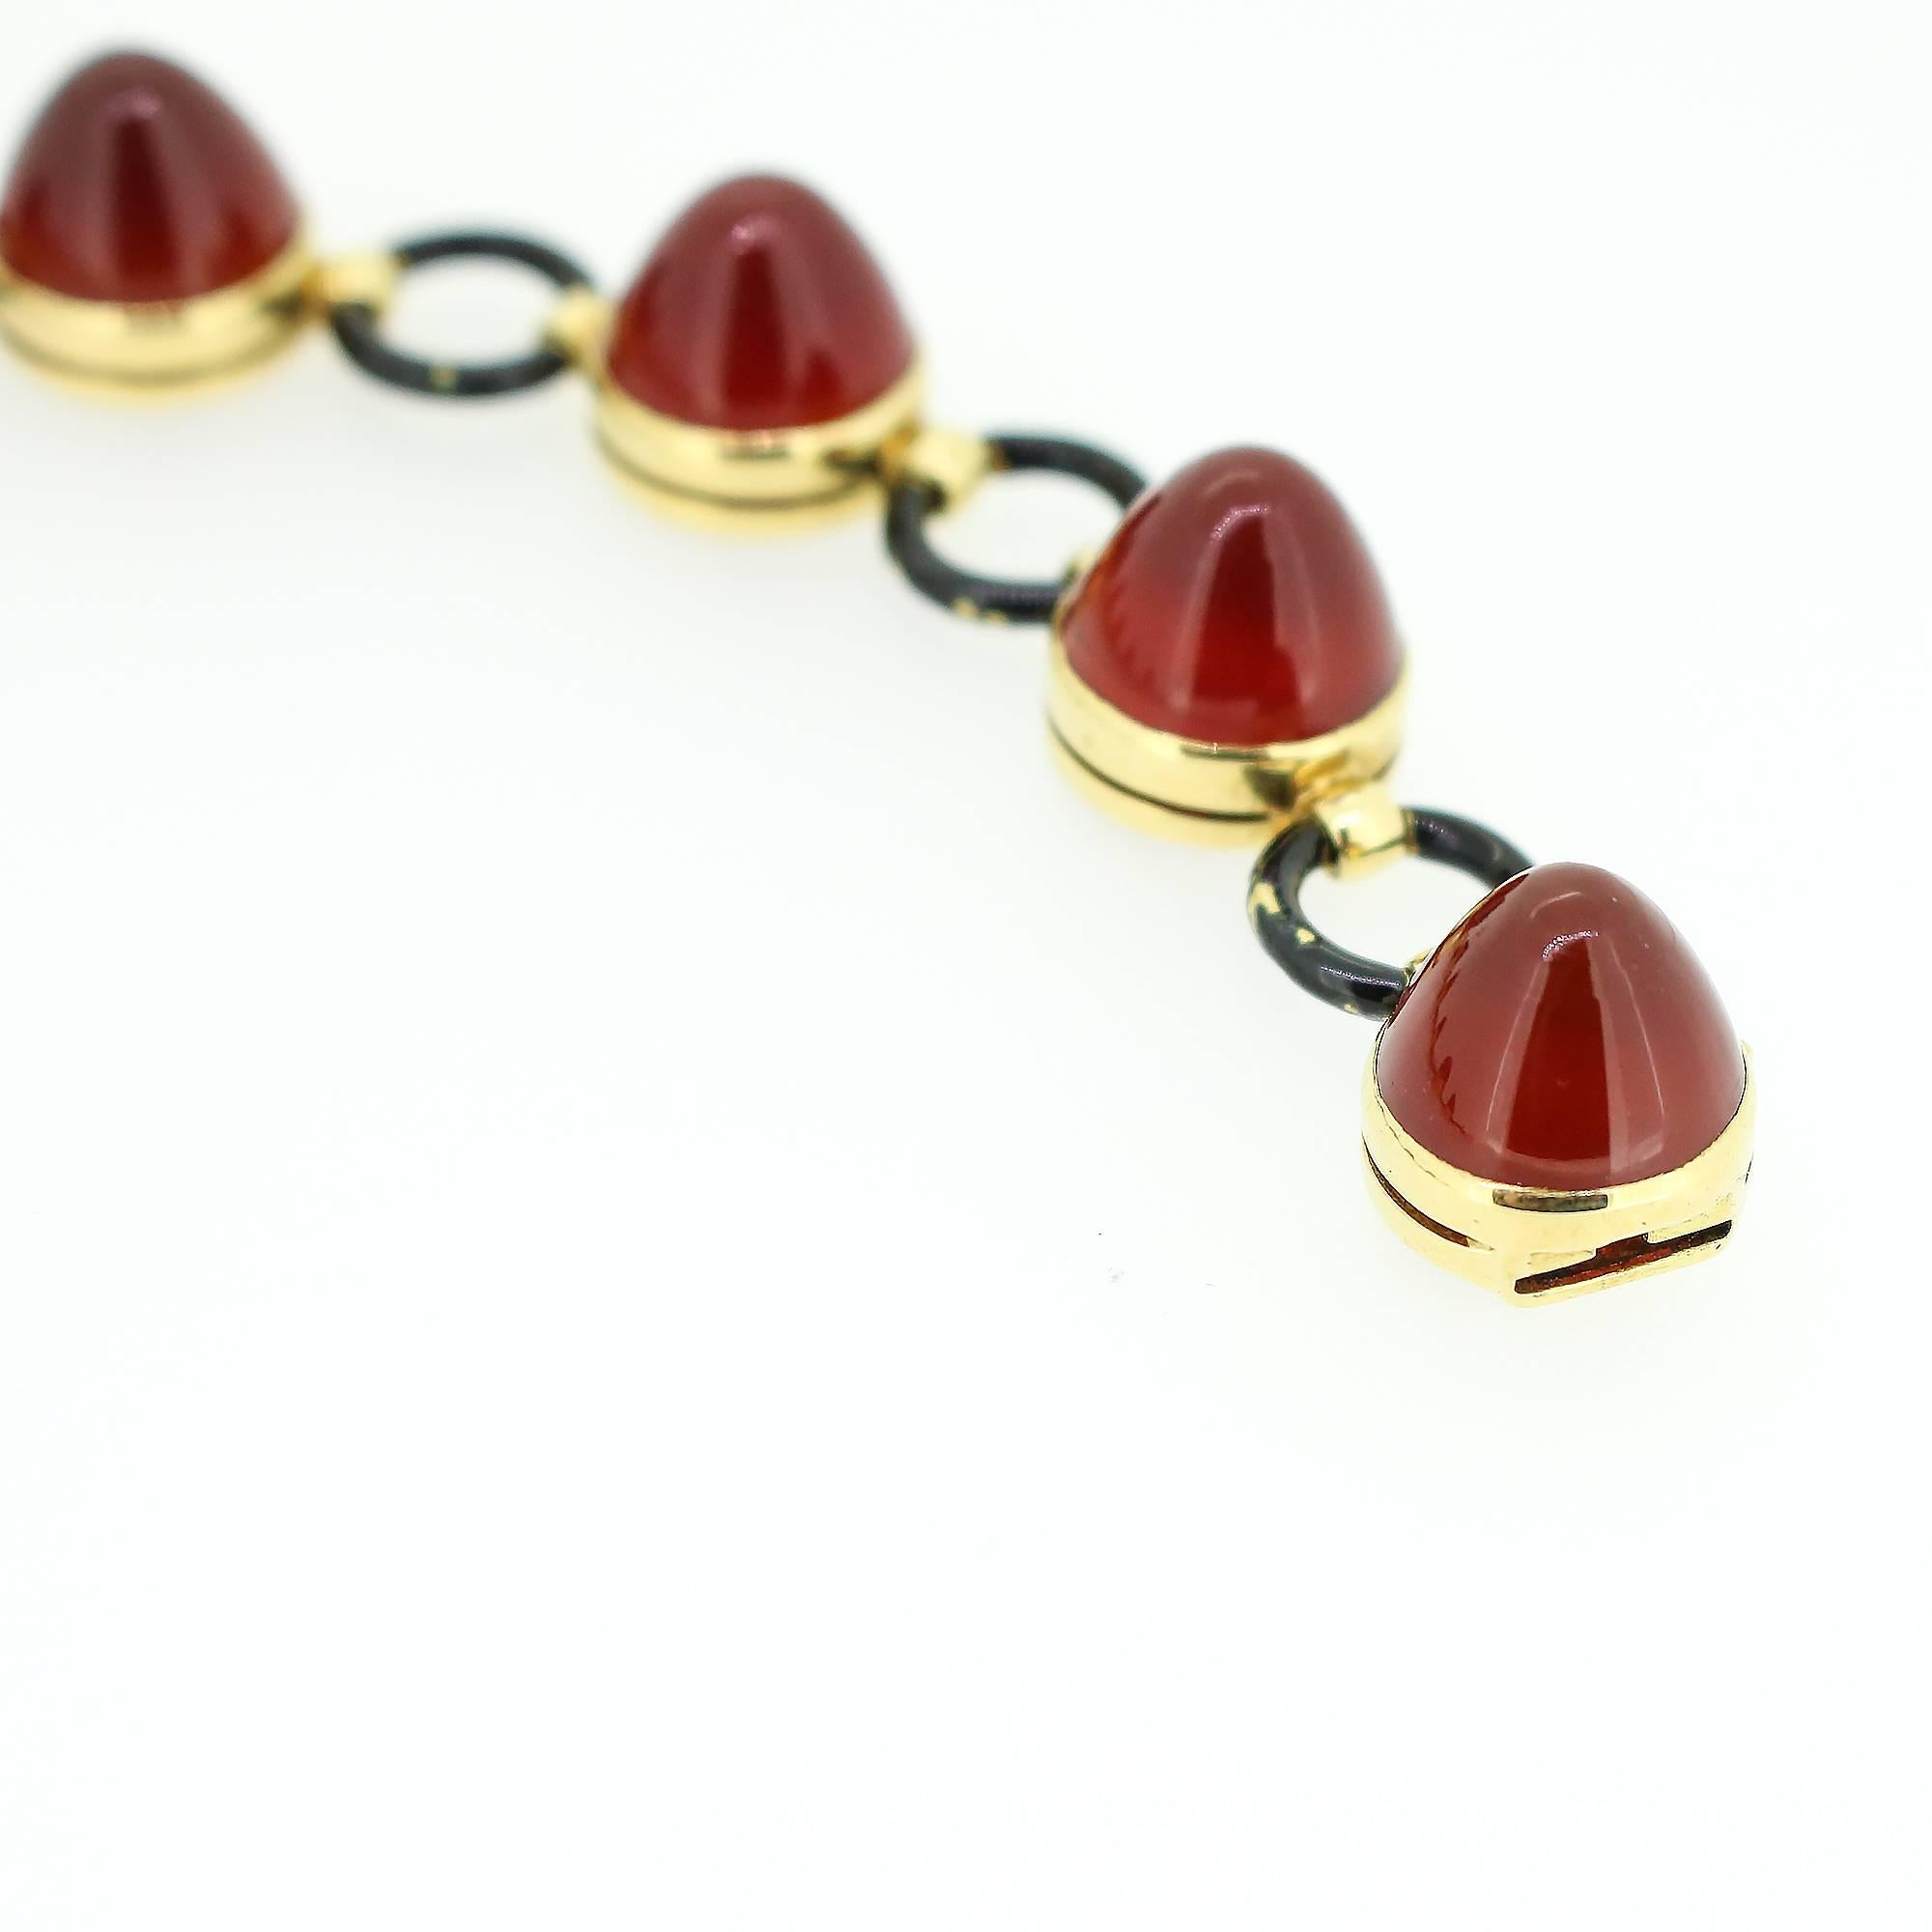 This unusual Art Deco bracelet features 8 cabochon carnelian set in 14K yellow gold and separated by yellow gold circle designs painted with black enamel. This creative design very accurately represents the culture and life of the 1920s.